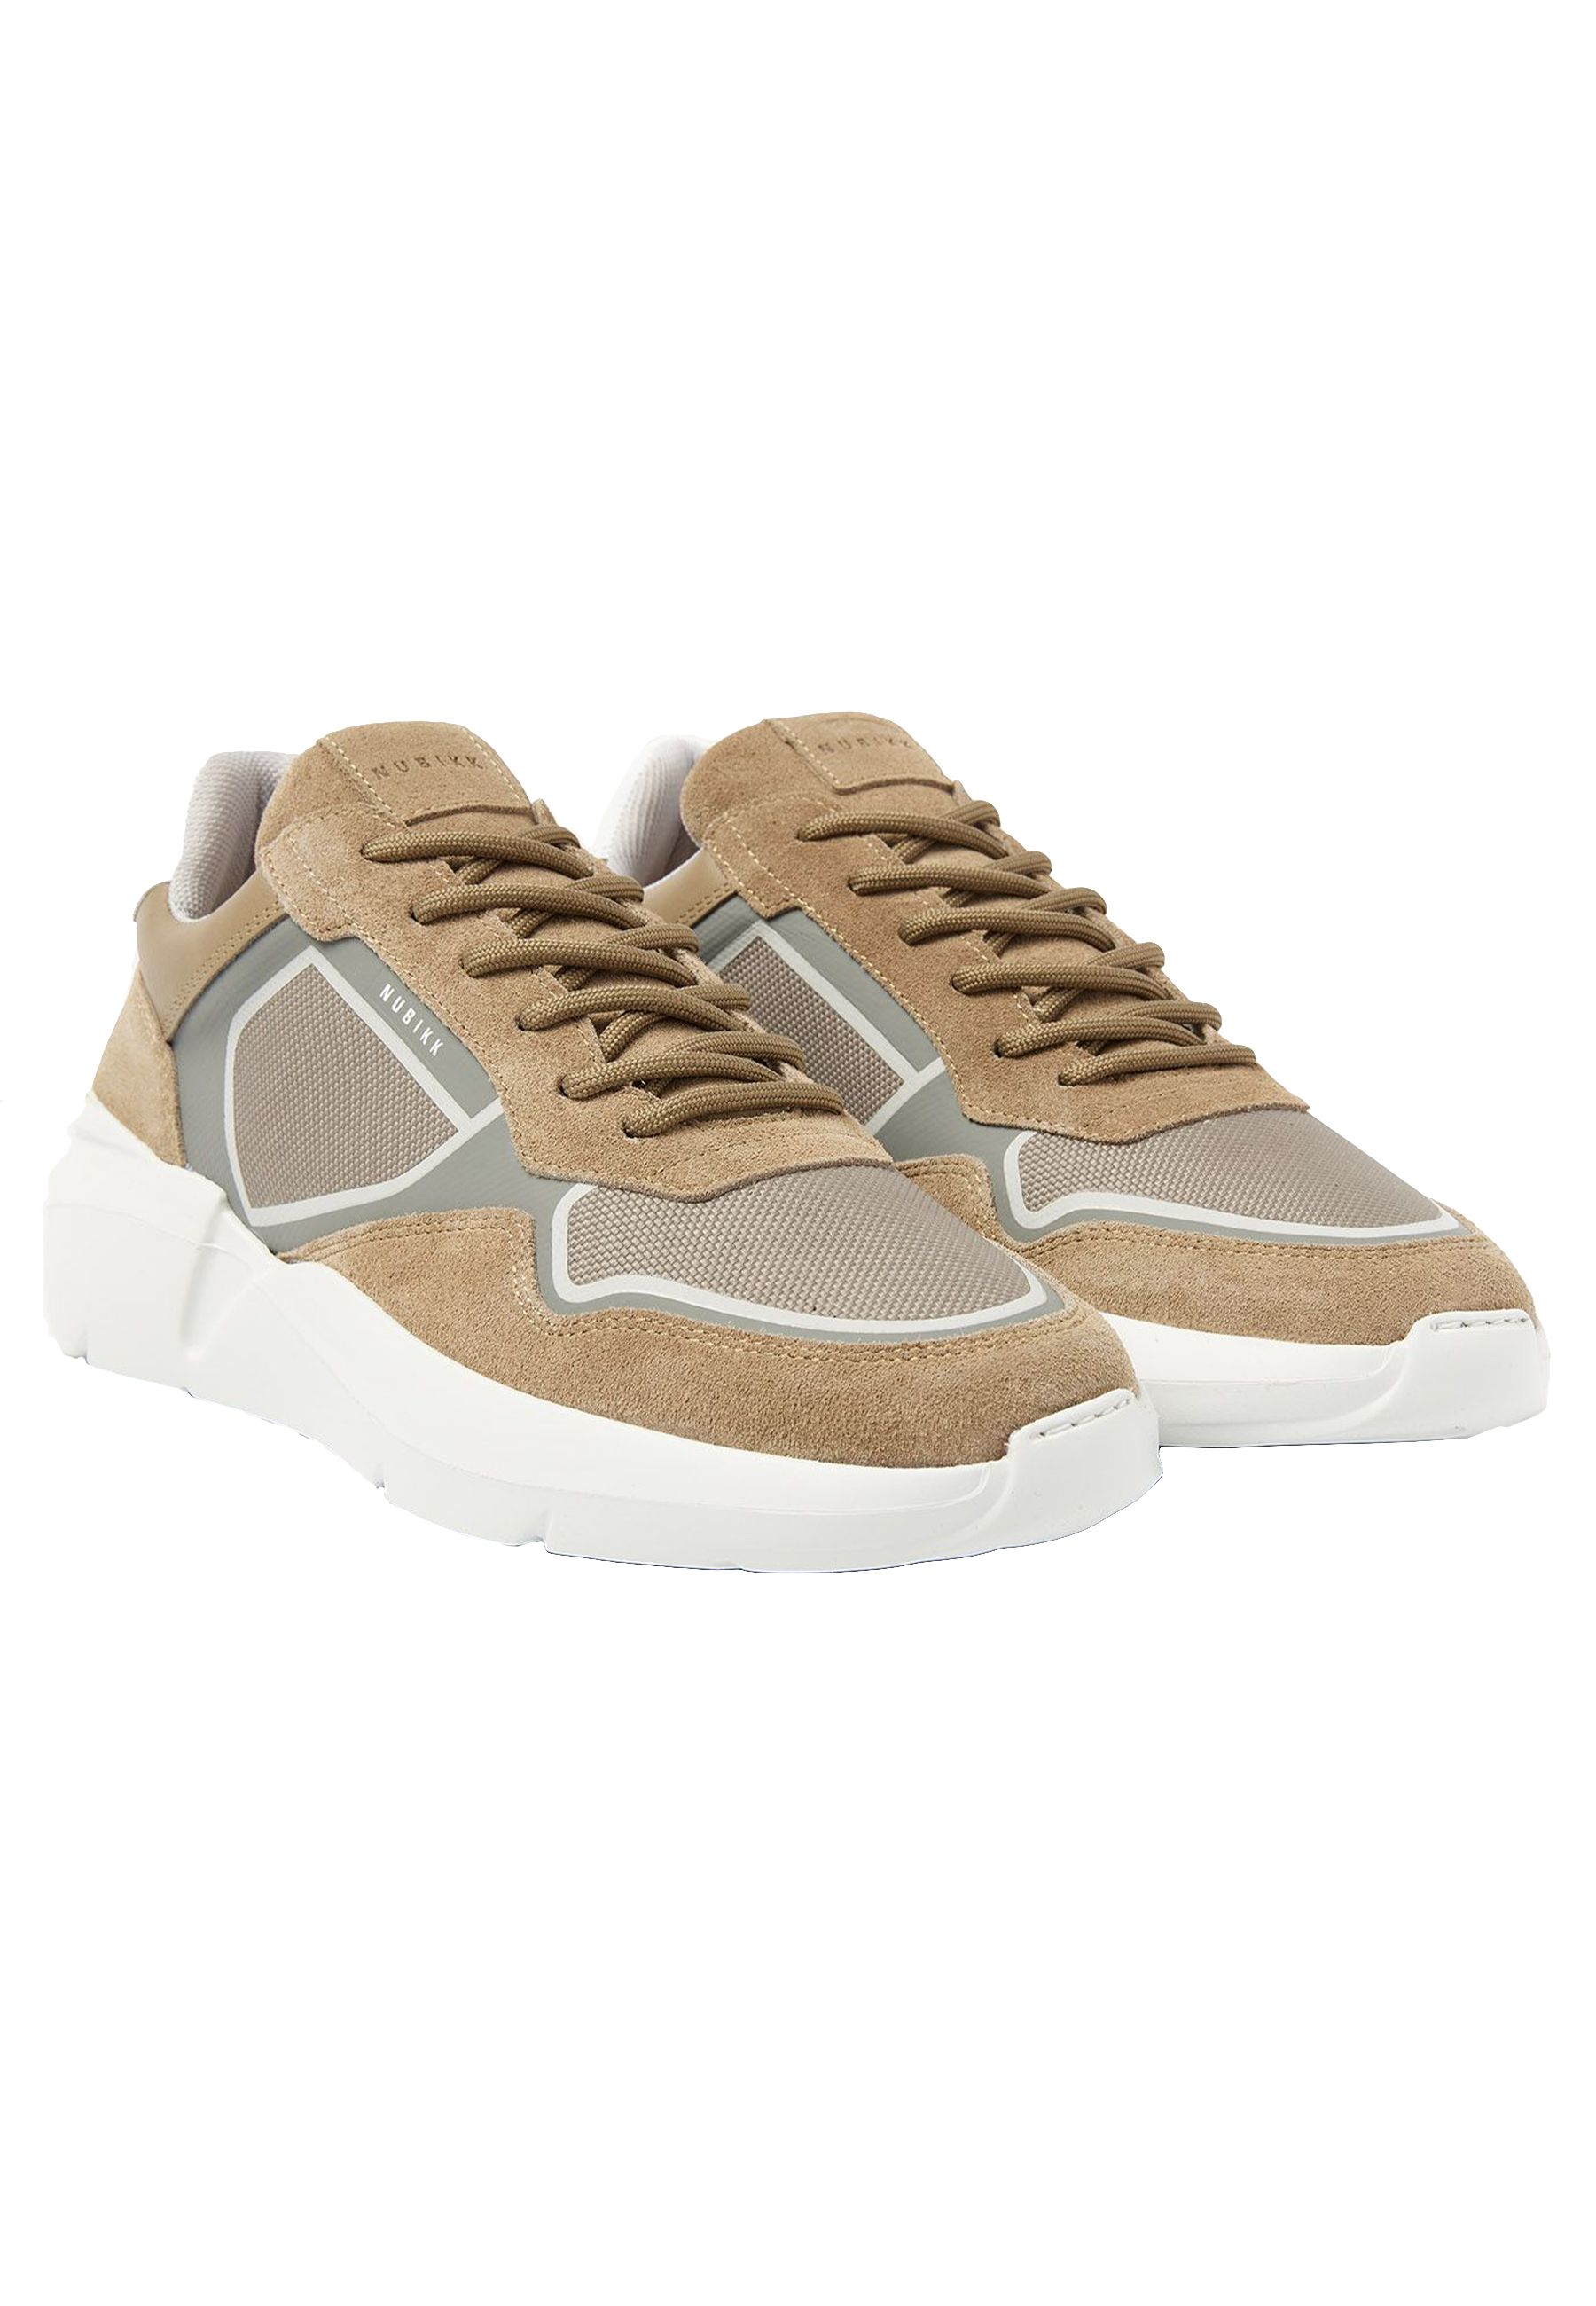 Roque road curl sneakers taupe